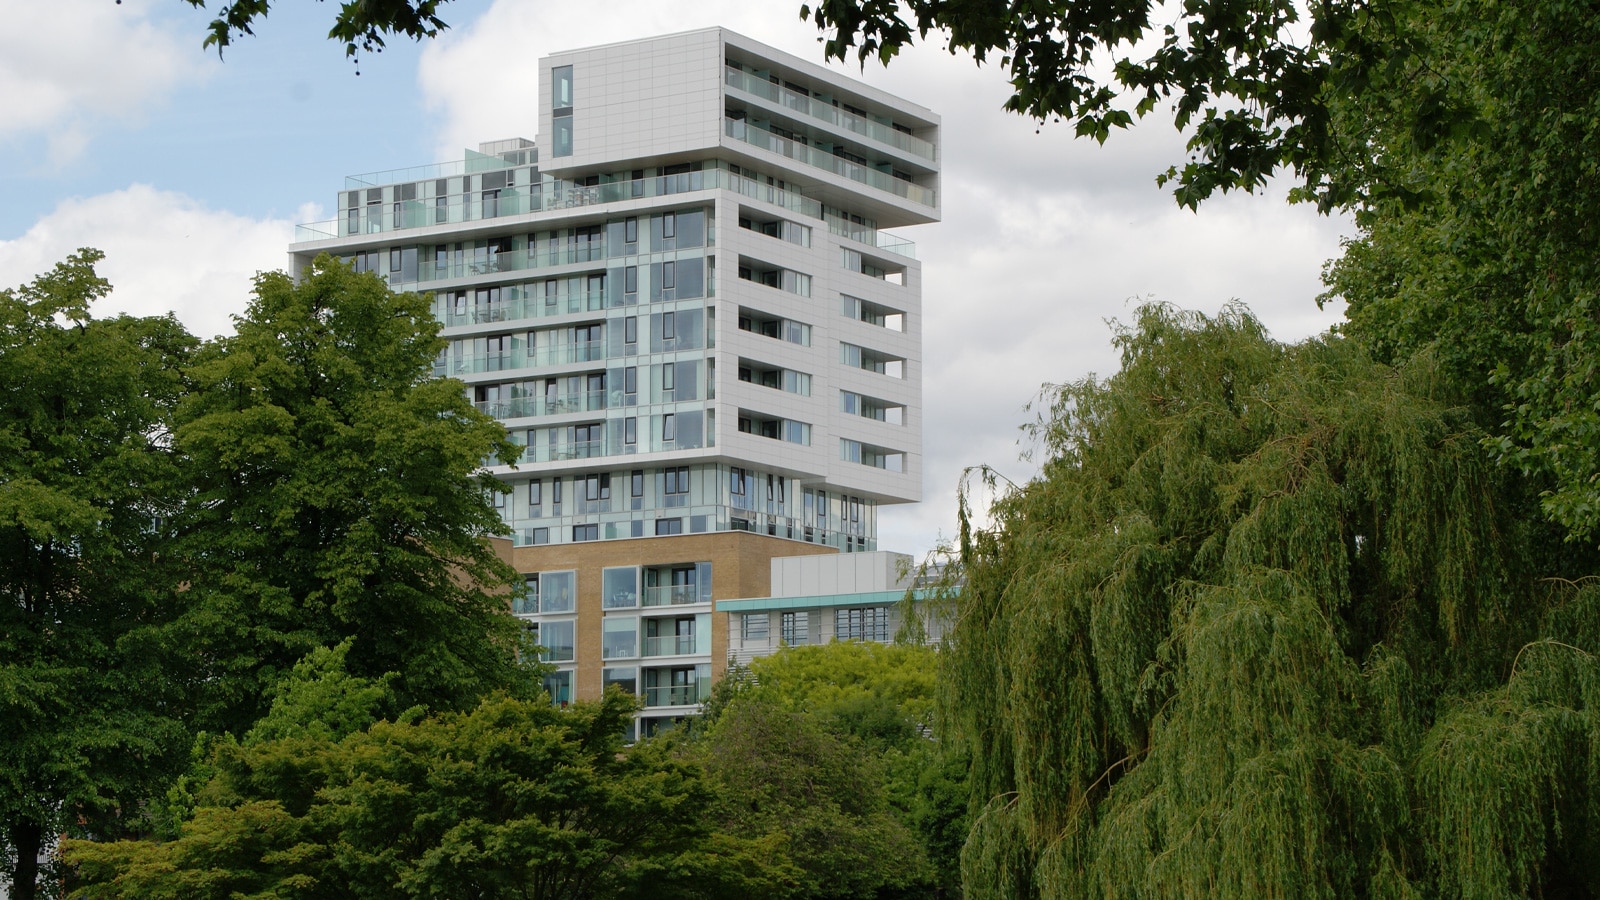 The Filaments, a premium residential complex open to the Thames